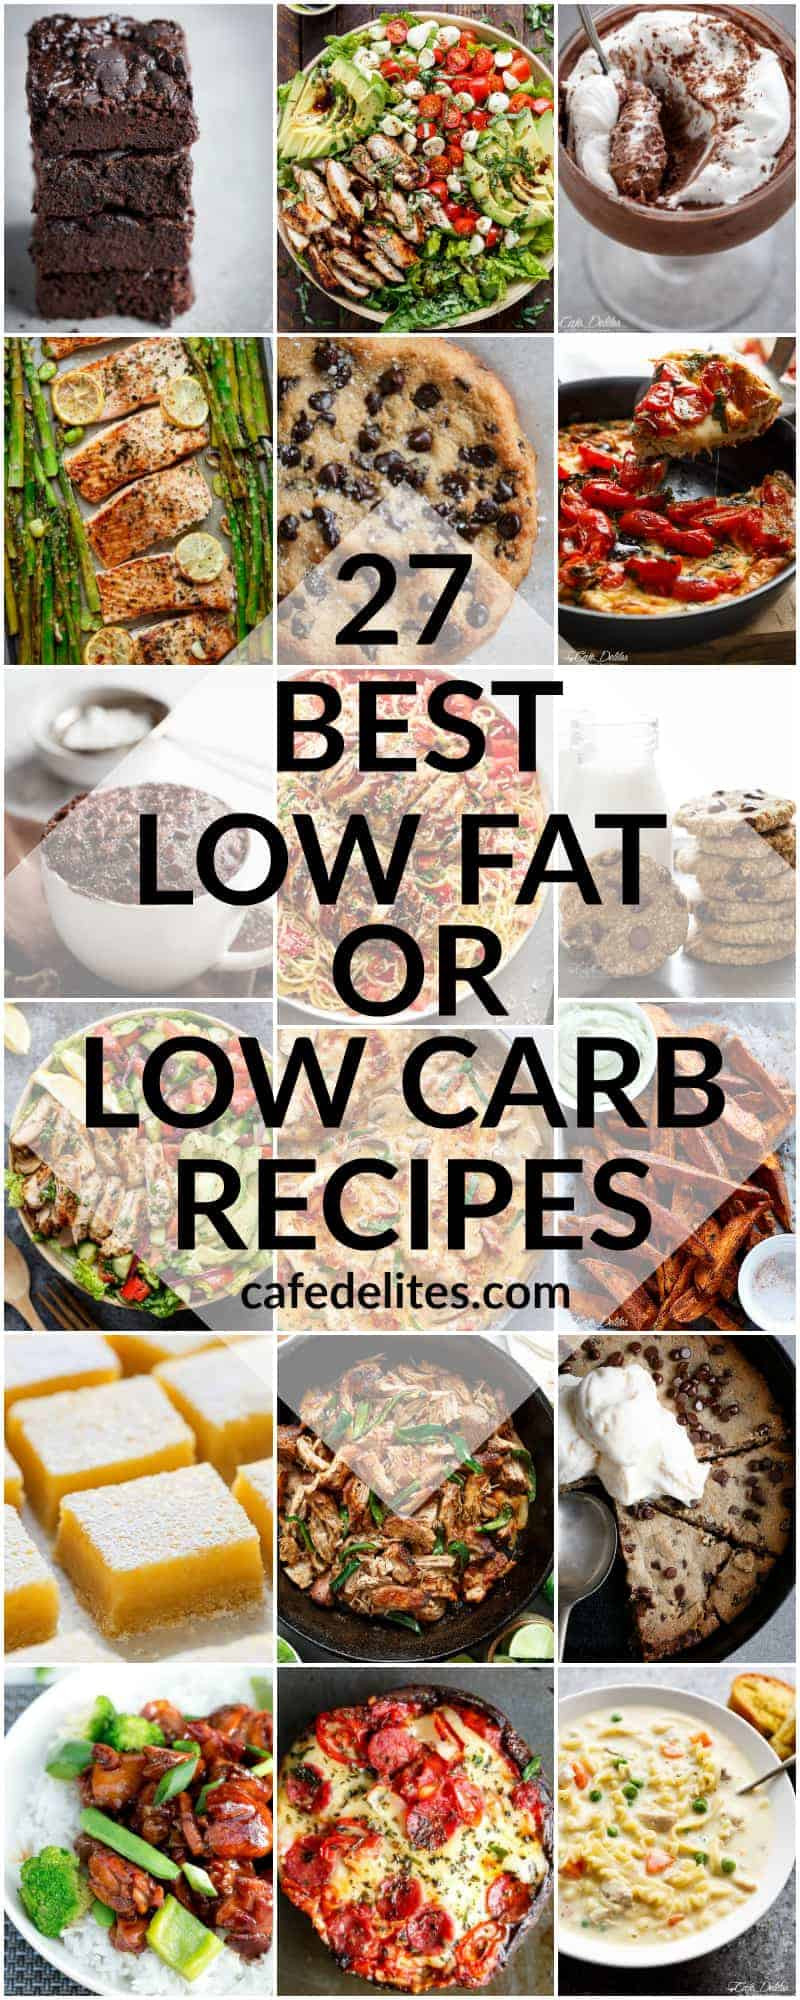 Low Carb And Low Fat Recipes
 27 BEST LOW FAT & LOW CARB RECIPES FOR 2017 Cafe Delites